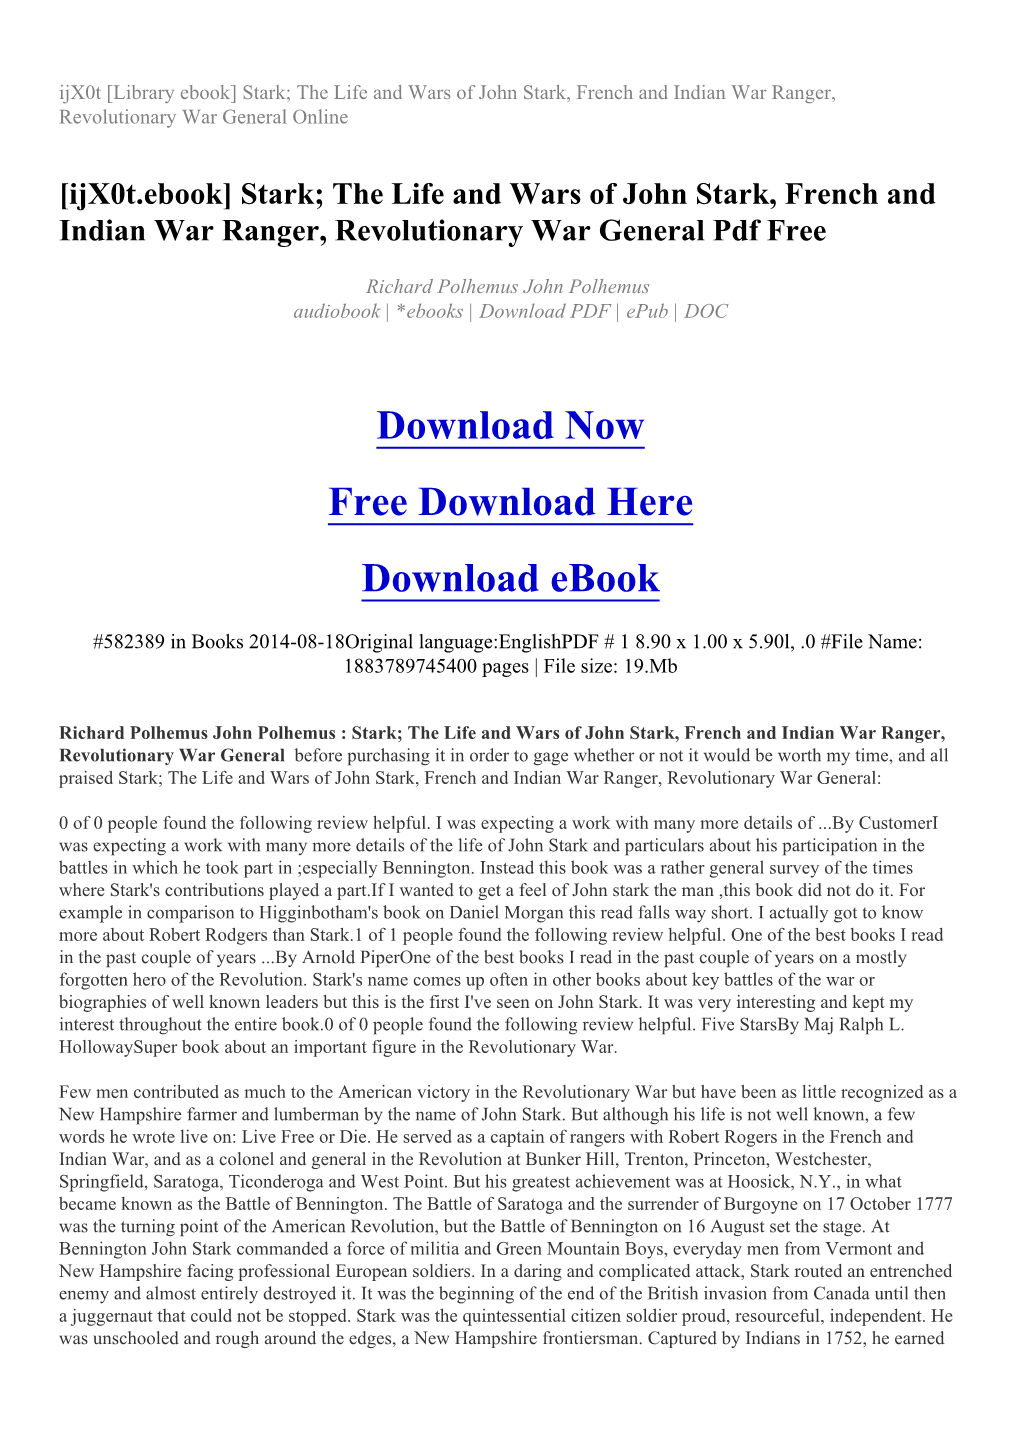 Stark; the Life and Wars of John Stark, French and Indian War Ranger, Revolutionary War General Online